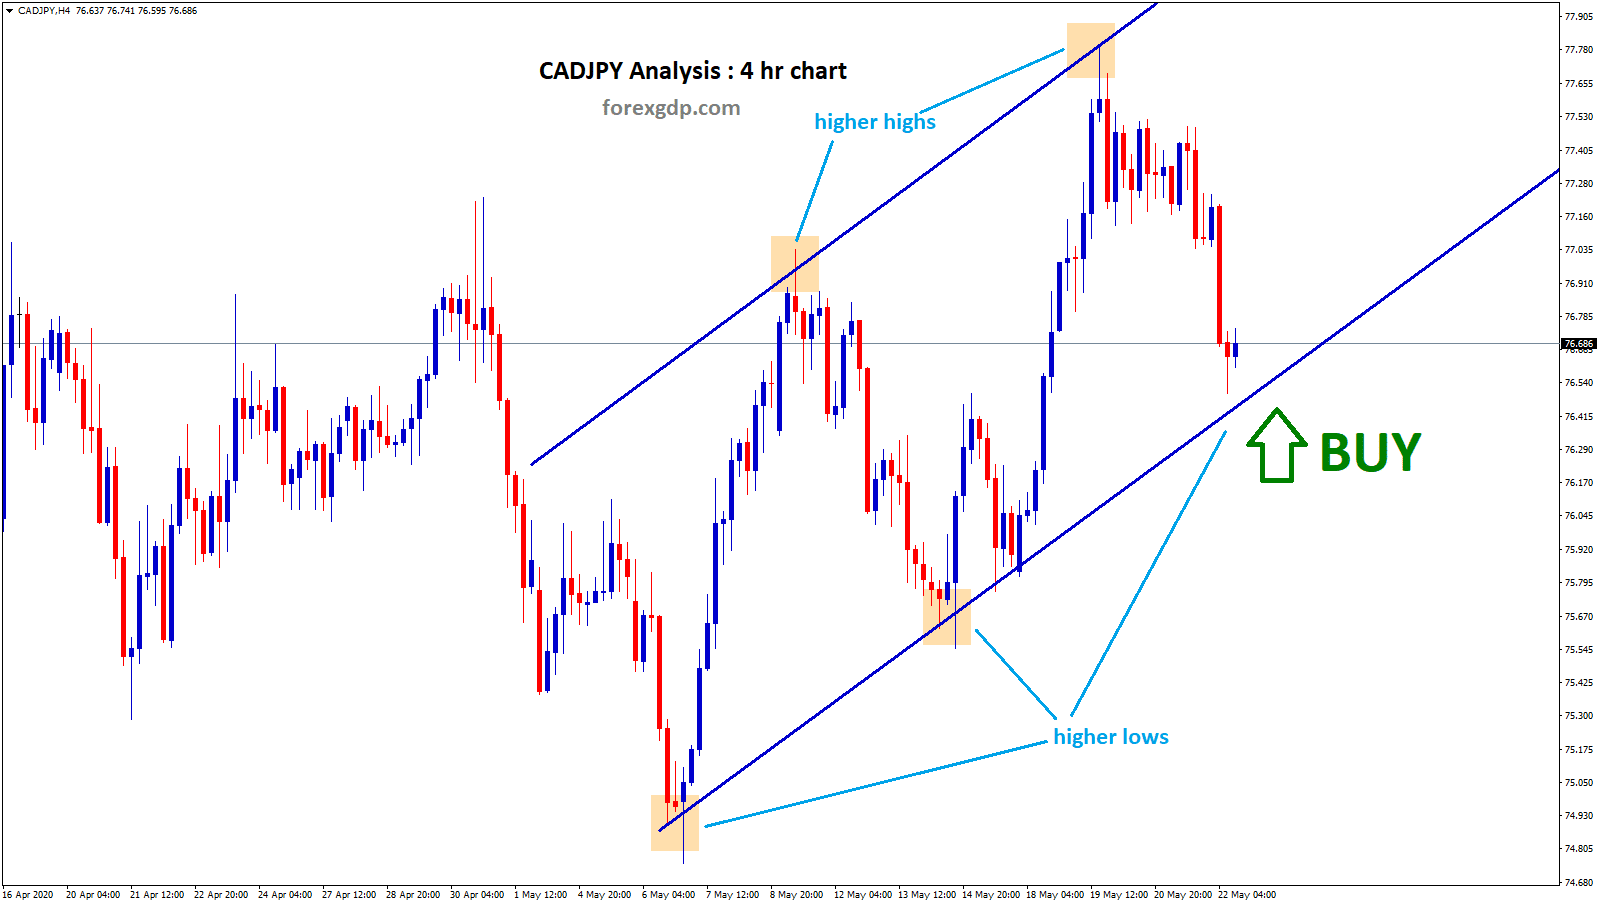 CADJPY reach trend line support in 4 hr chart